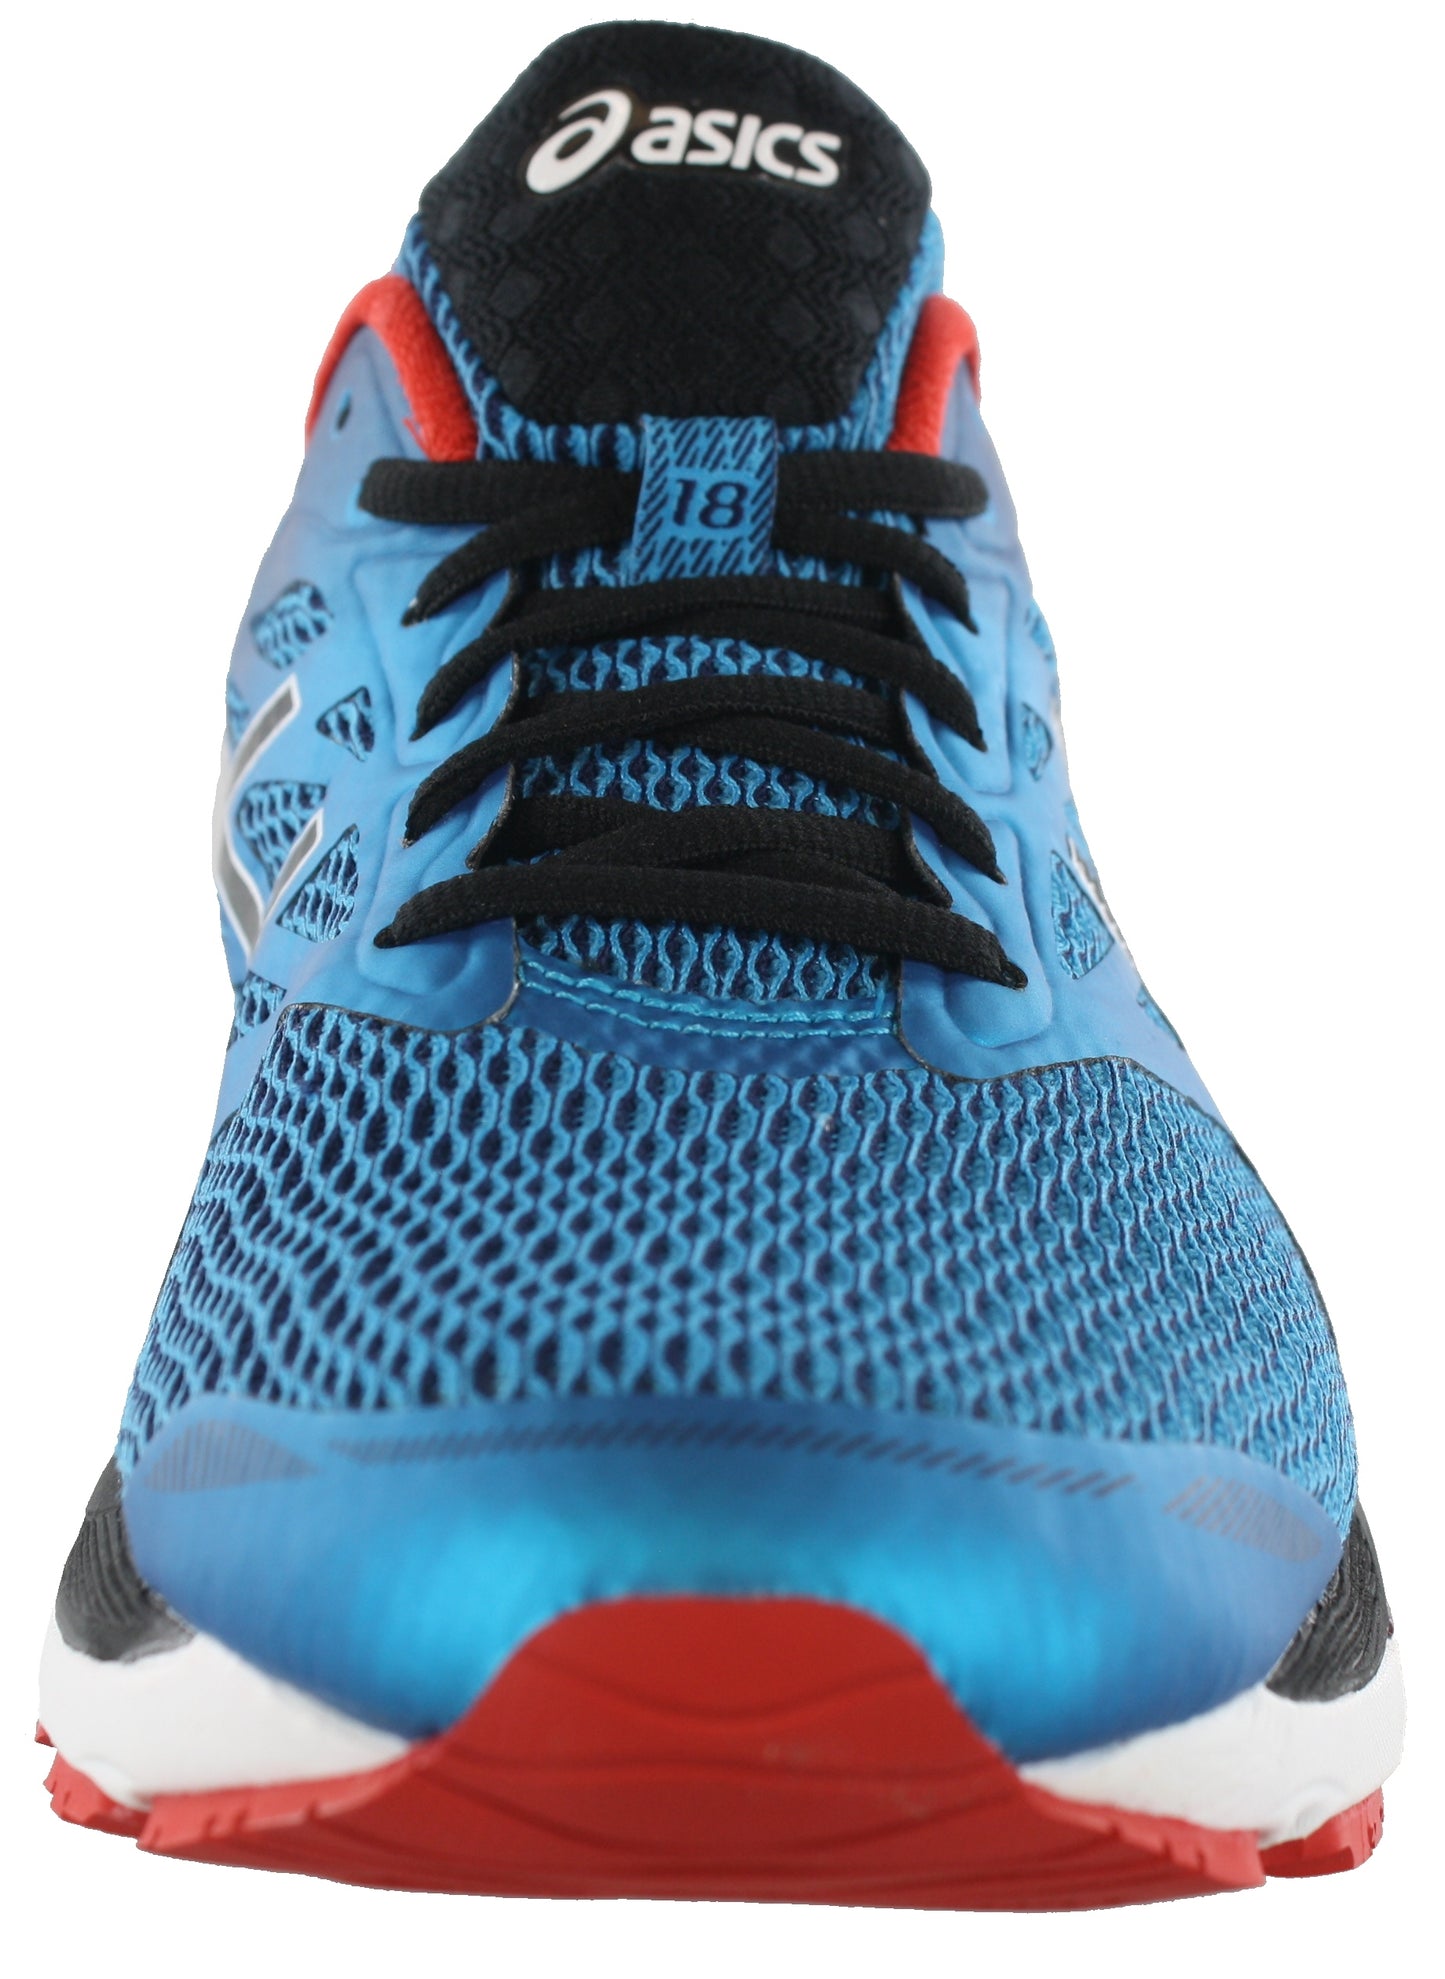 
                  
                    Front of Imperial blue with black, white, and vermillion red accents ASICS Men Walking Trail Cushioned Running Shoes Cumulus 18
                  
                